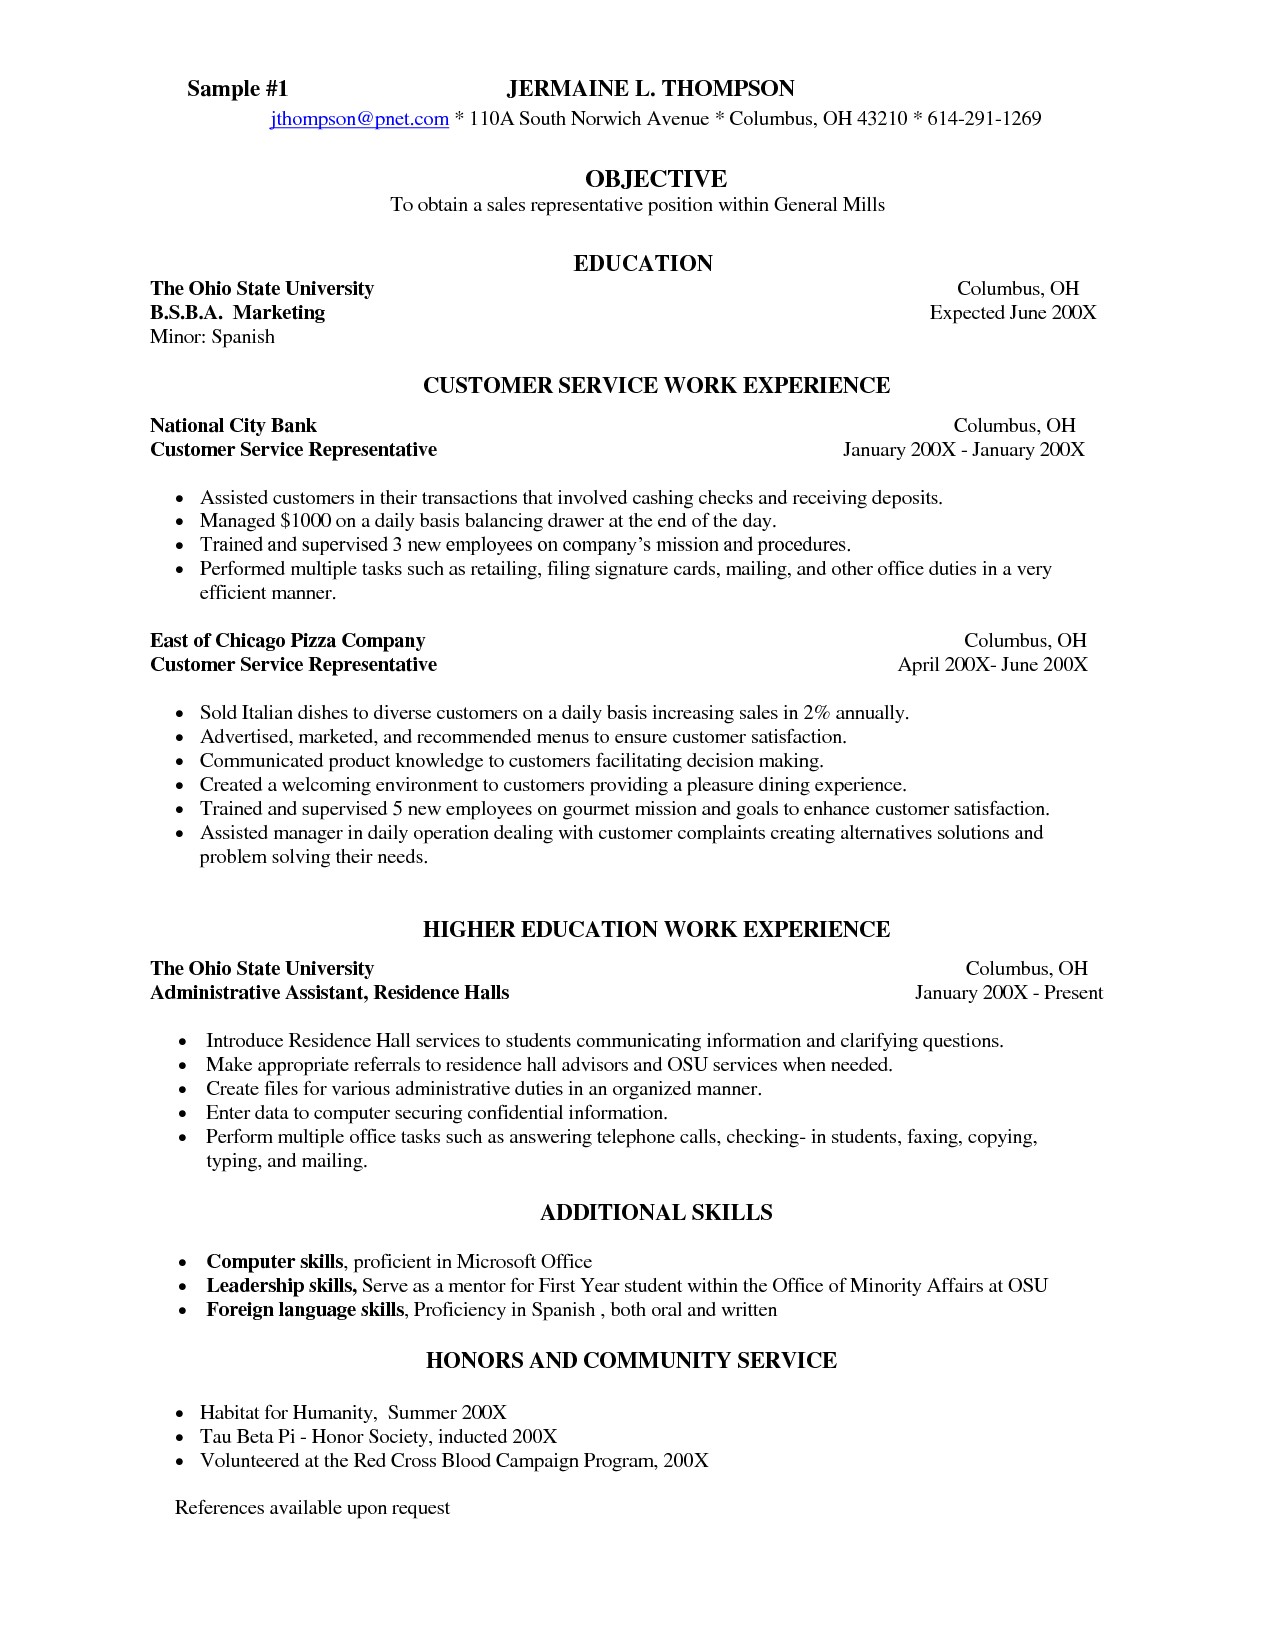 sample server resume templates information skills template for customer service with work experience